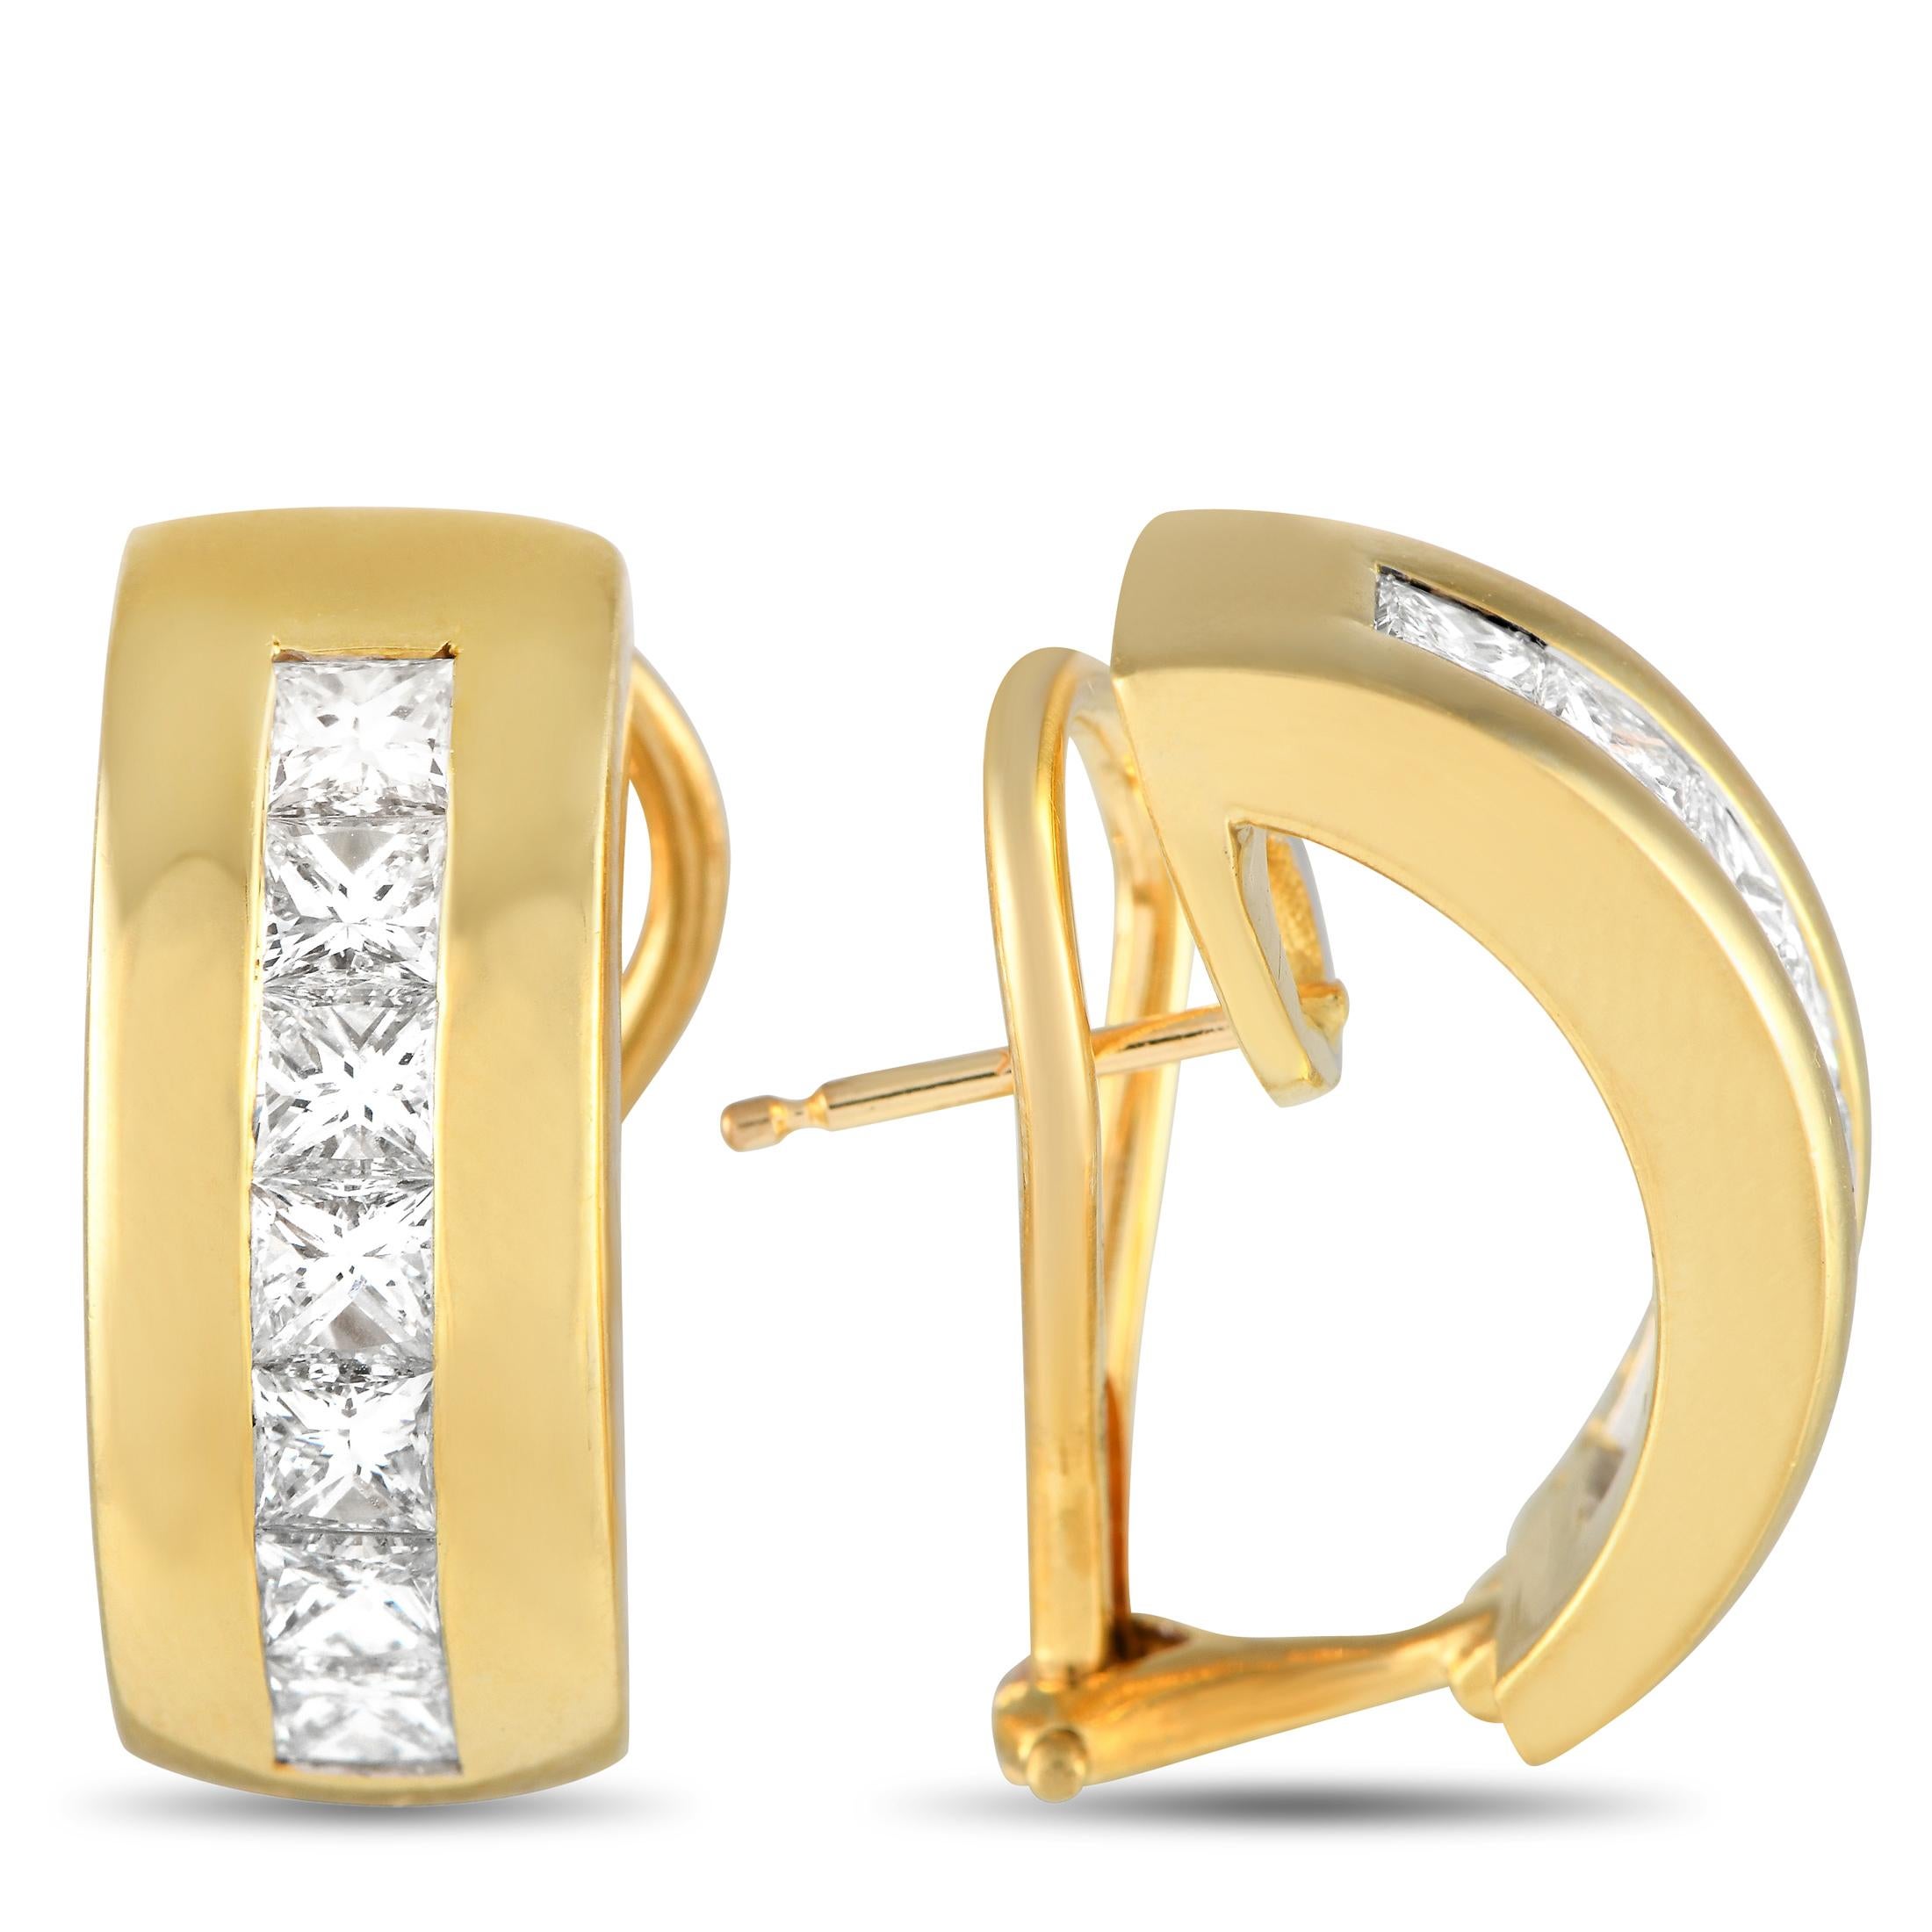 These Tiffany & Co. earrings are sleek, simple, and incredibly sophisticated. At the center of the 18K Yellow Gold hoop, a series of princess-cut Diamonds make a sparkling statement. Each earring measures 0.75 long by 0.25 wide  together, they come